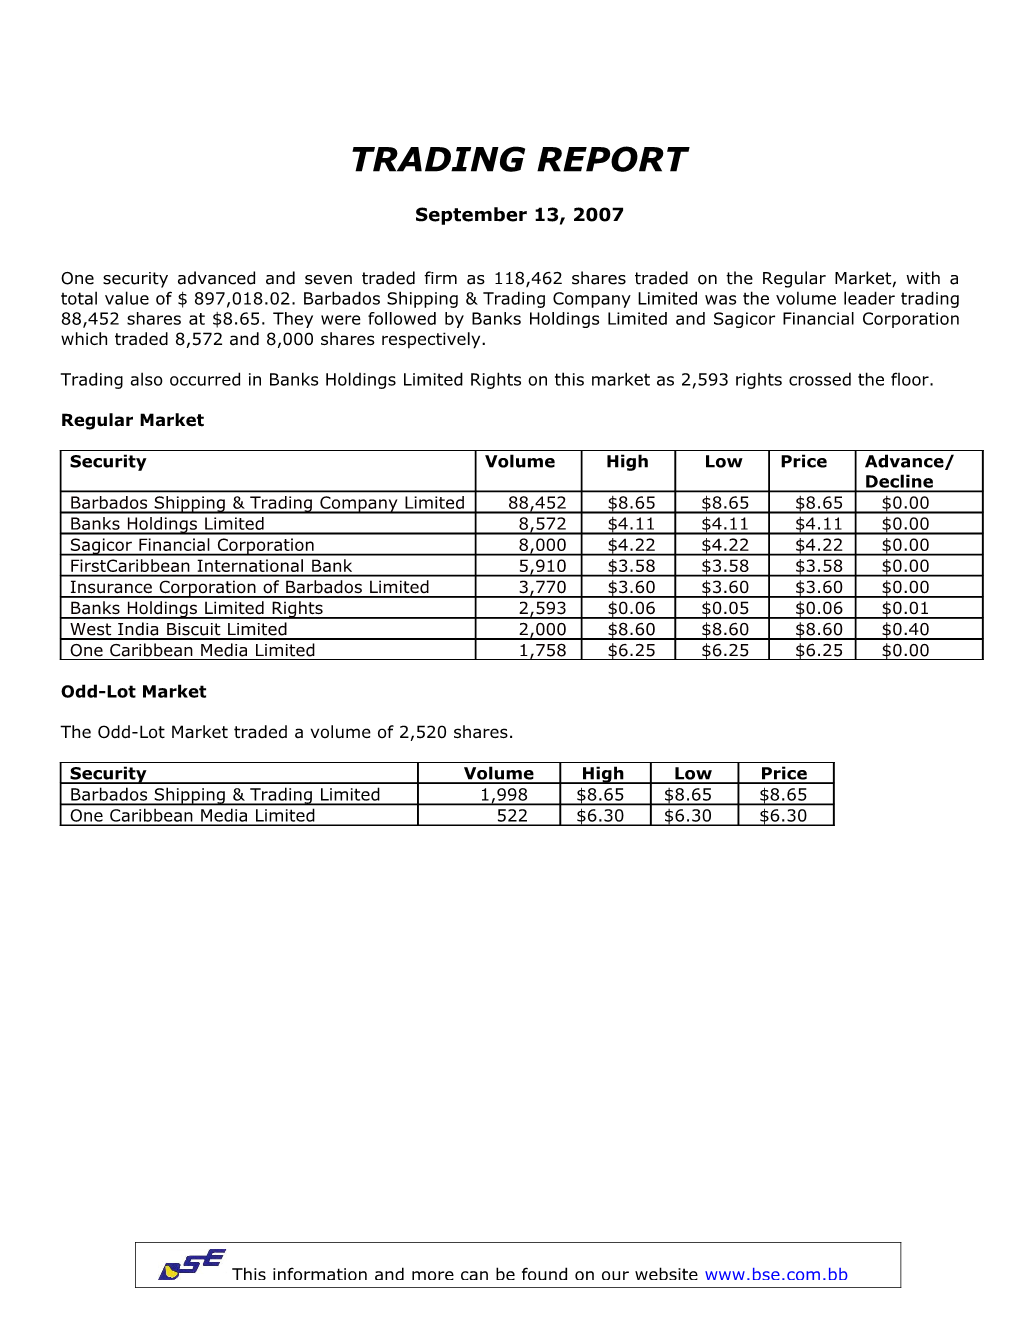 Trading Report s36